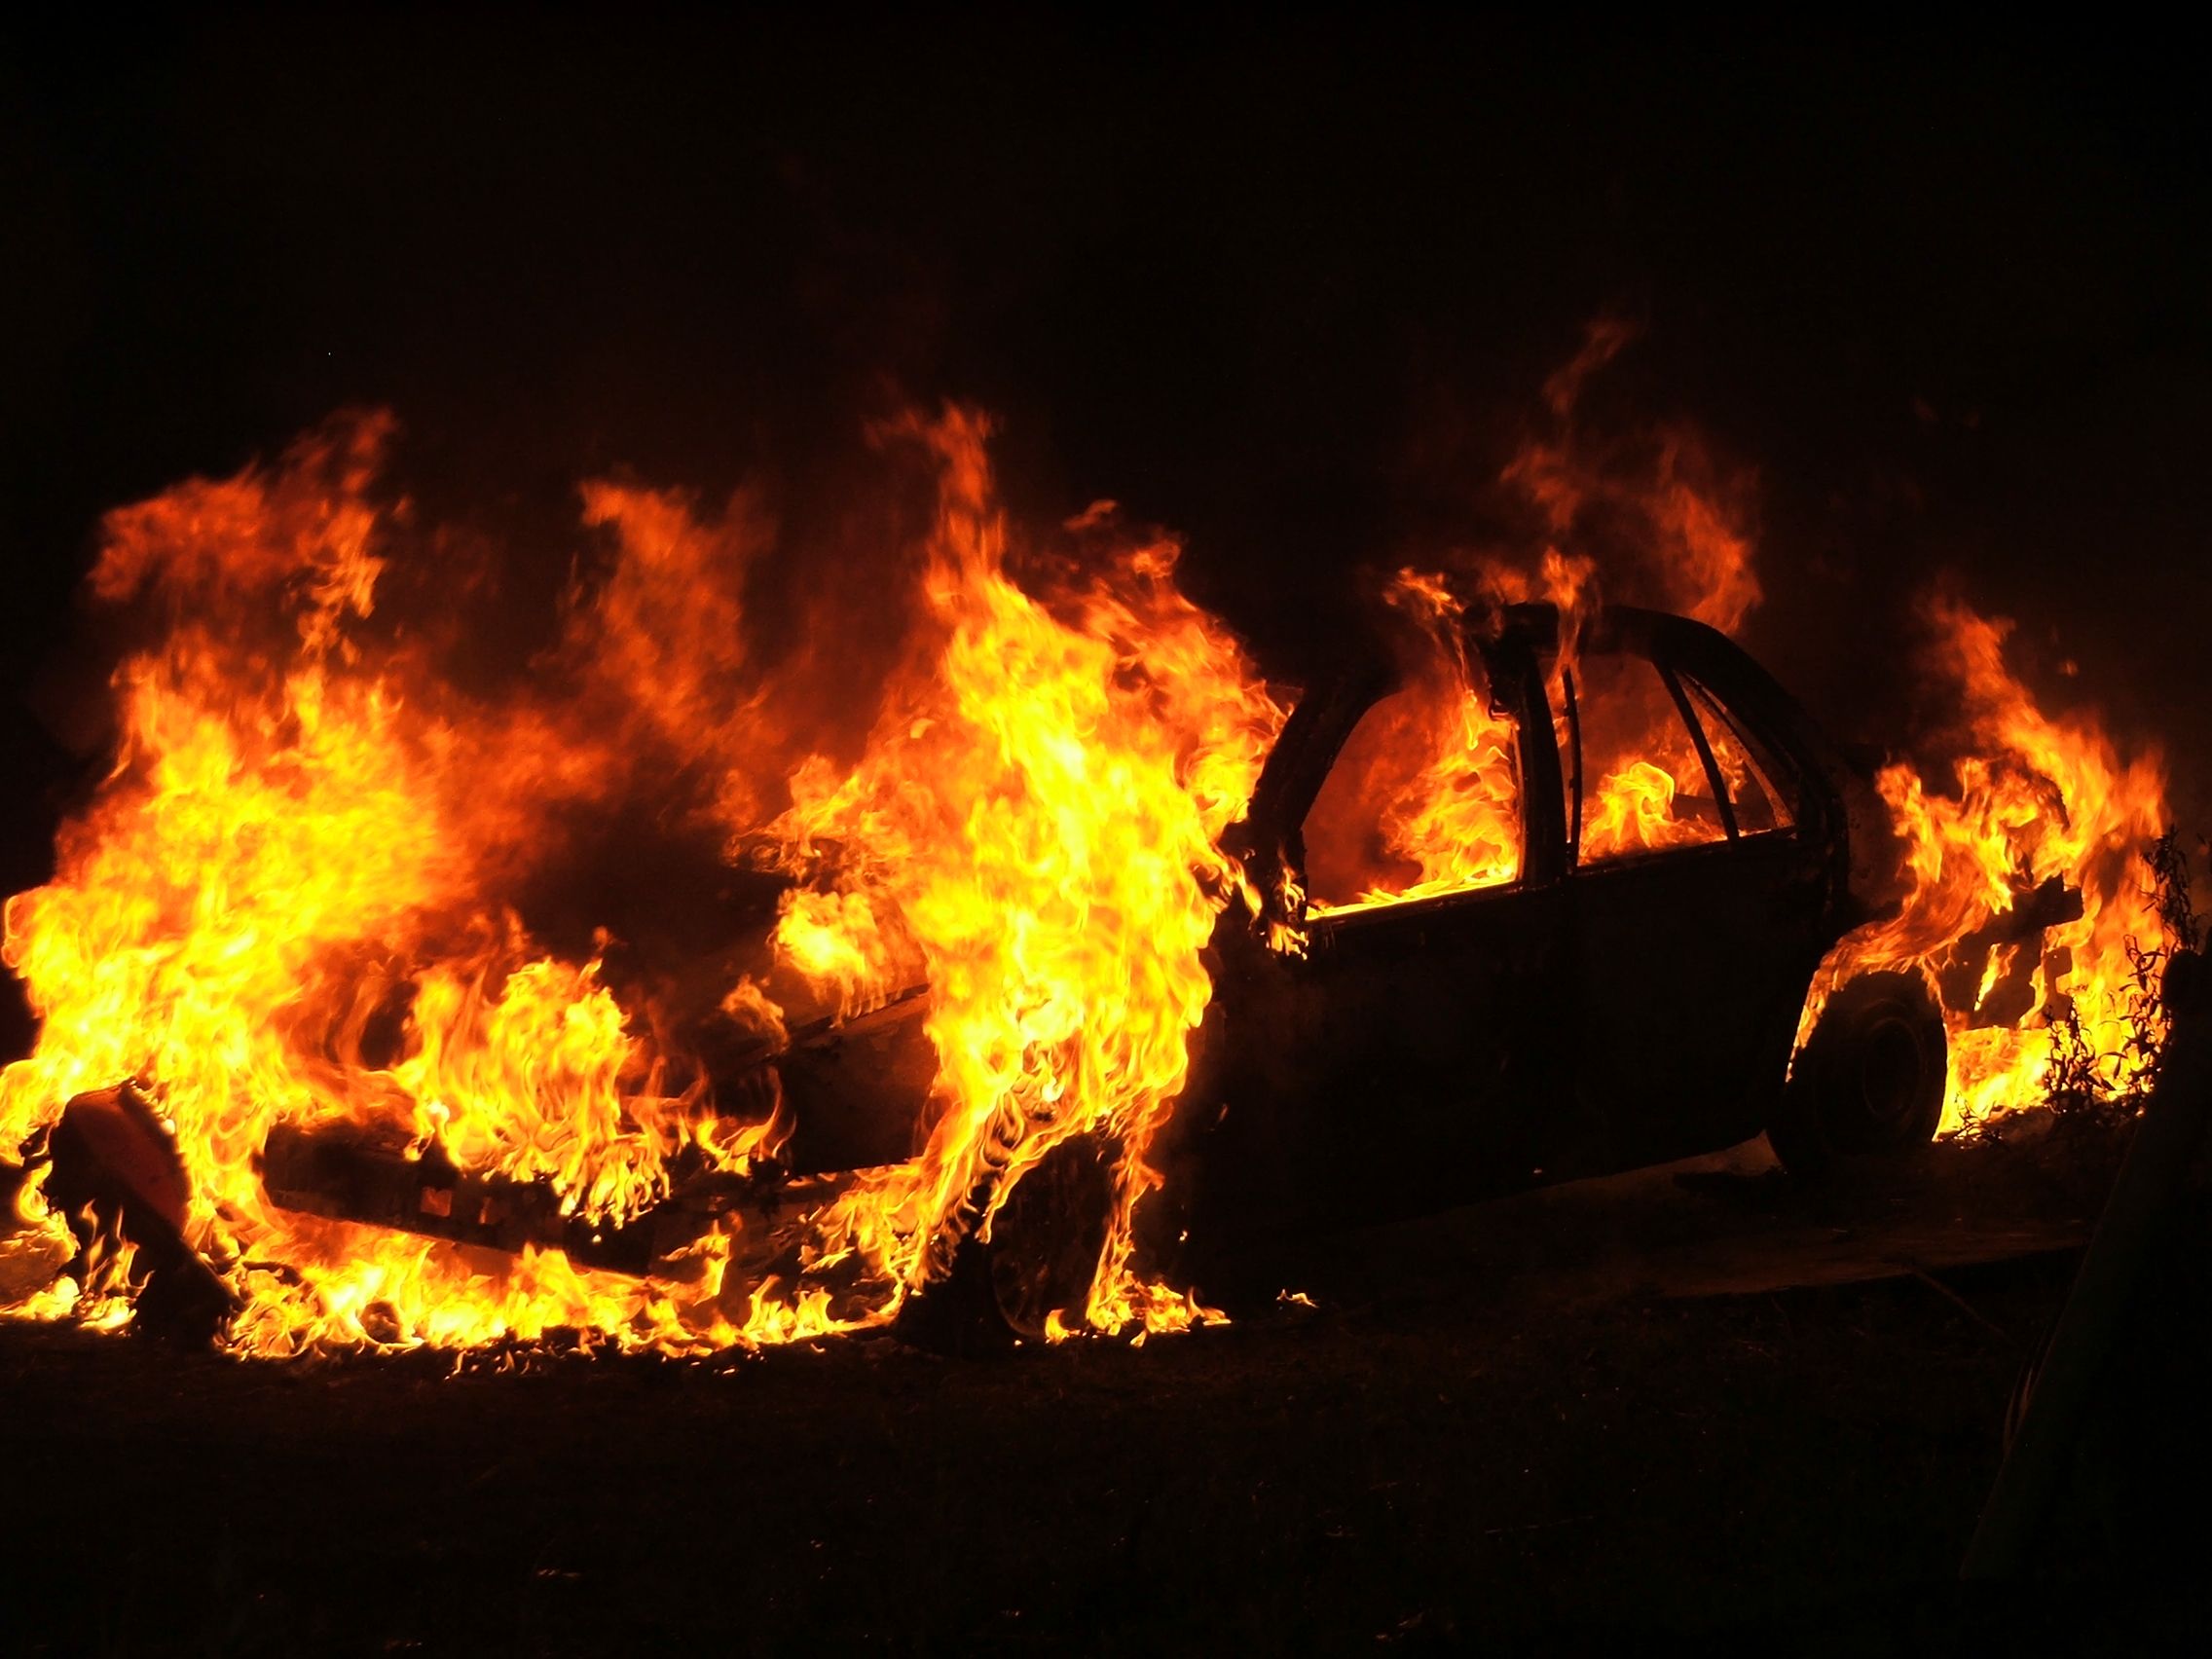 Vehicle arson spreads to small Danish town